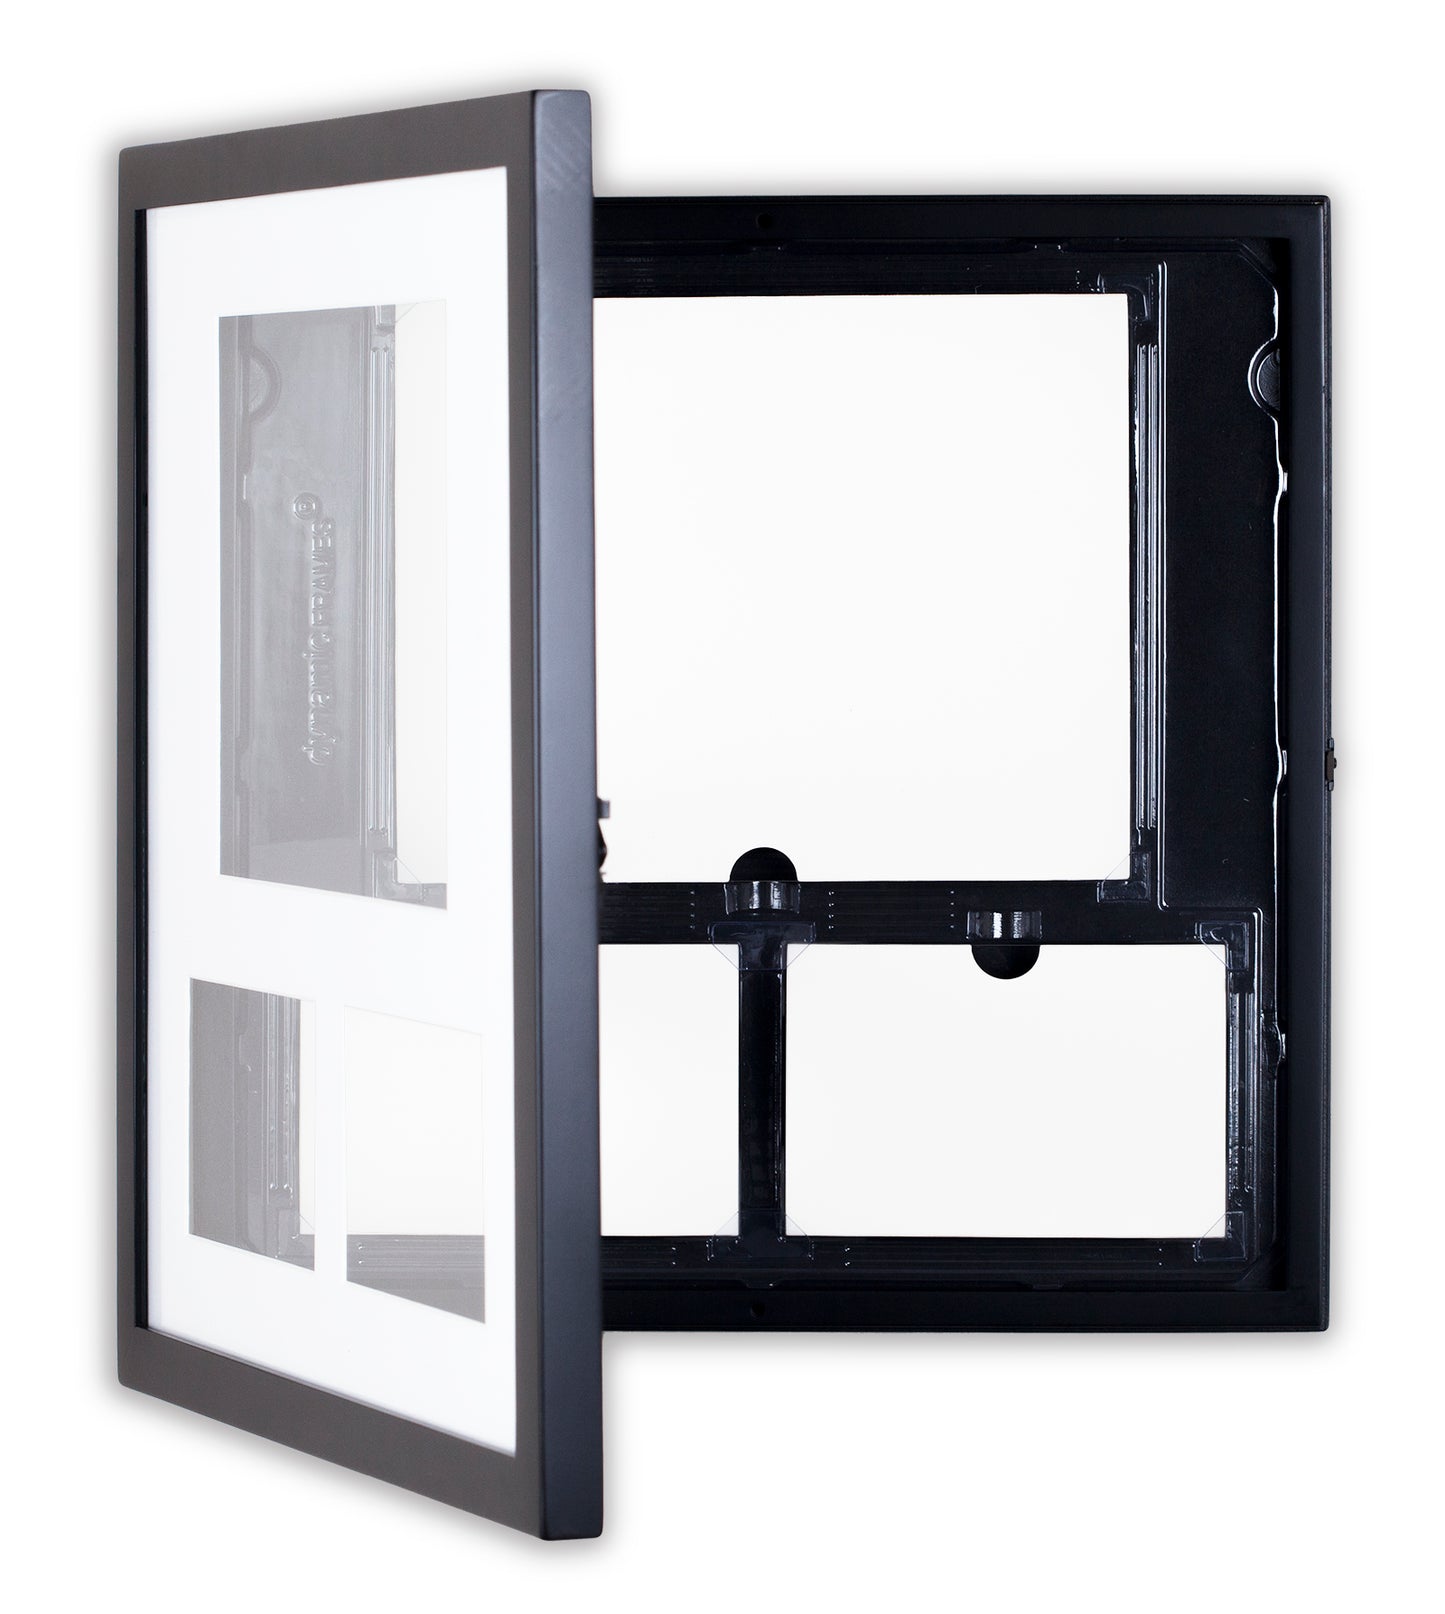 DSQR insert trays, various sizes to fit all 17"x17" Dynamic Squares frames